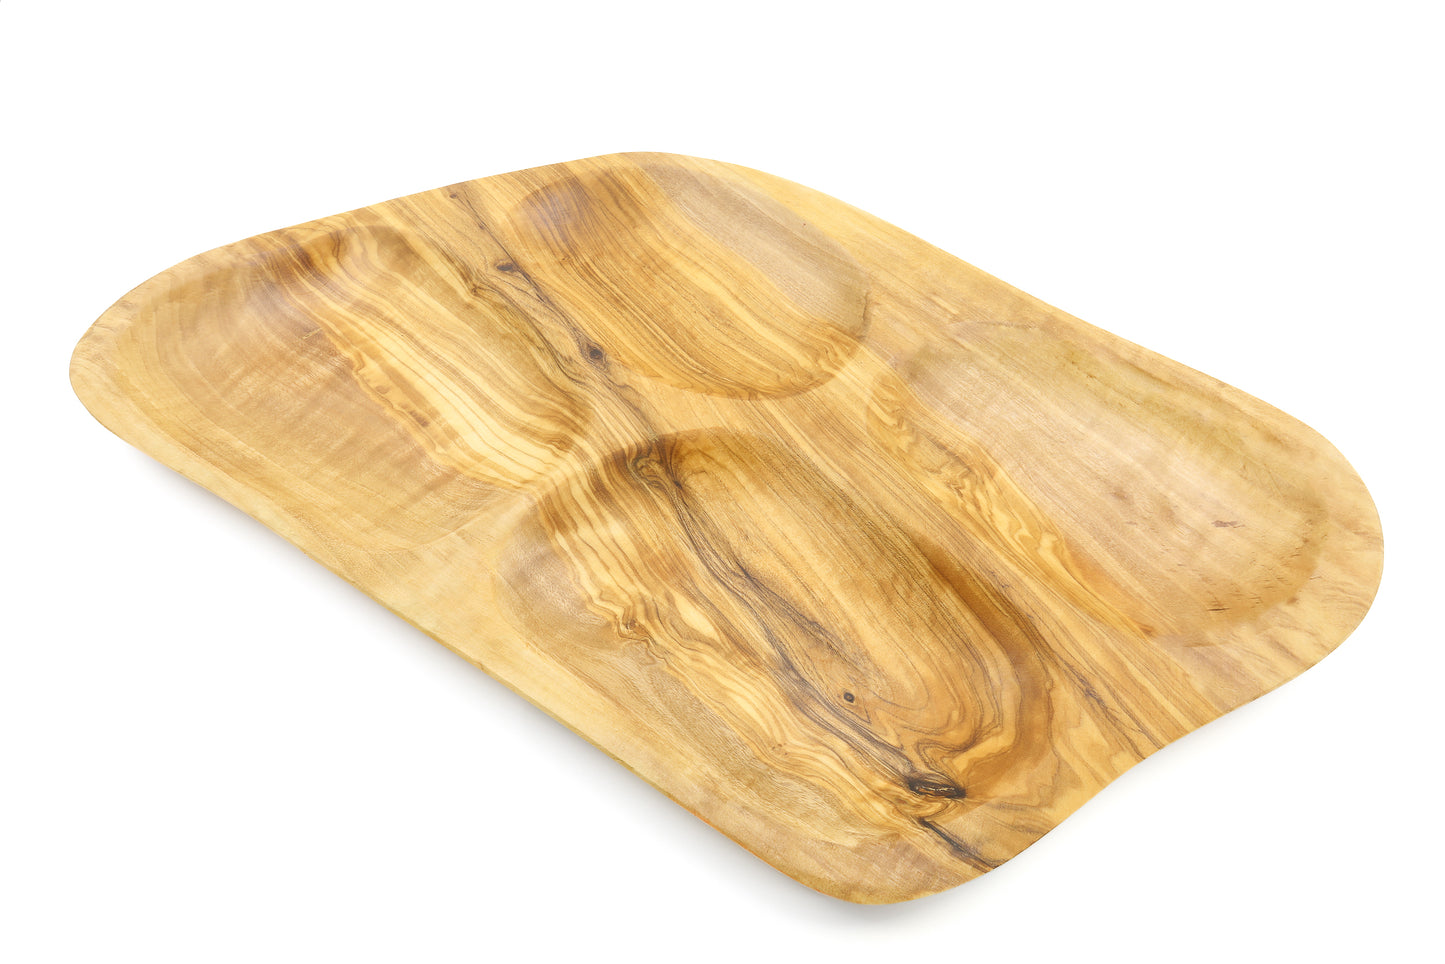 Rustic olive wood serving tray with an irregular layout for your favorite snacks